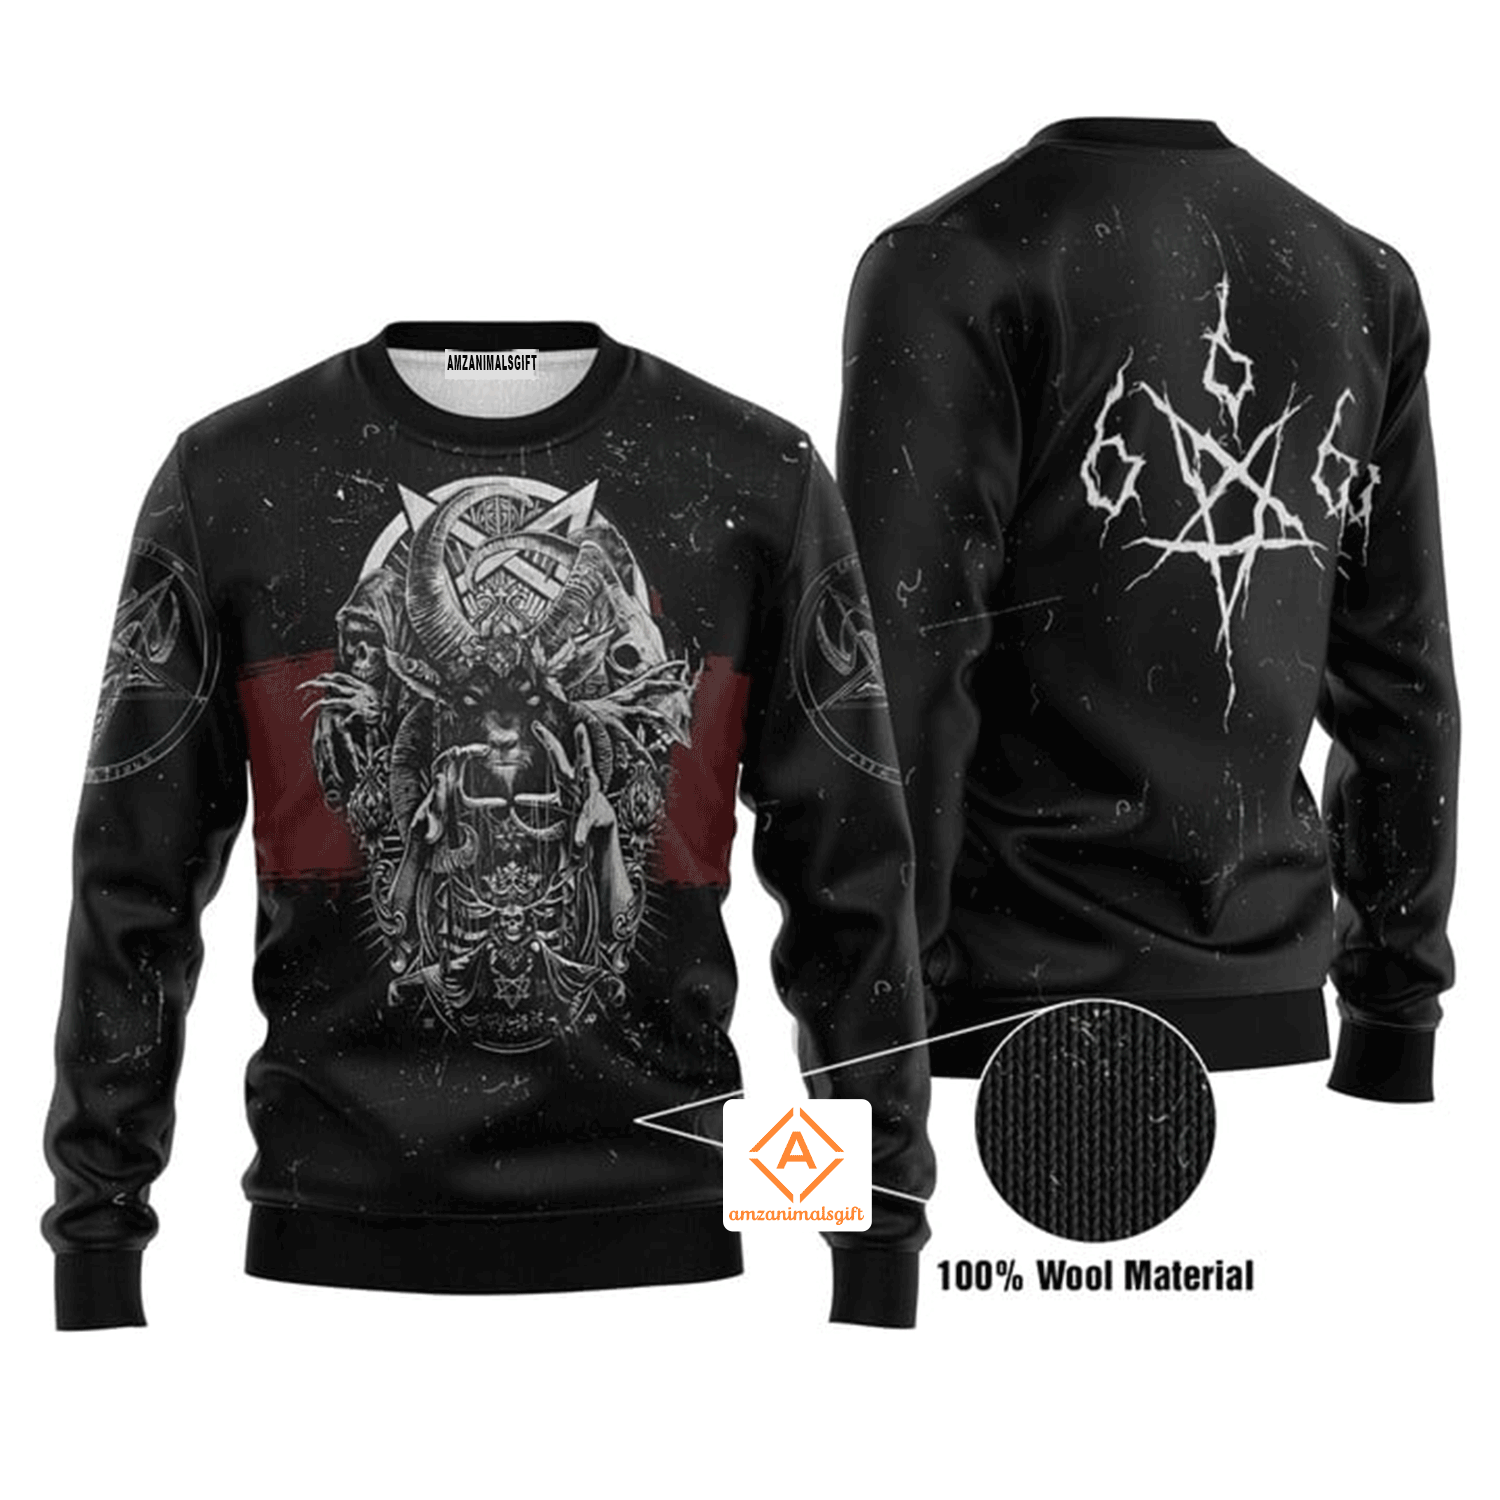 Satanic Skull Christmas Sweater, Ugly Sweater For Men & Women, Perfect Outfit For Christmas New Year Autumn Winter